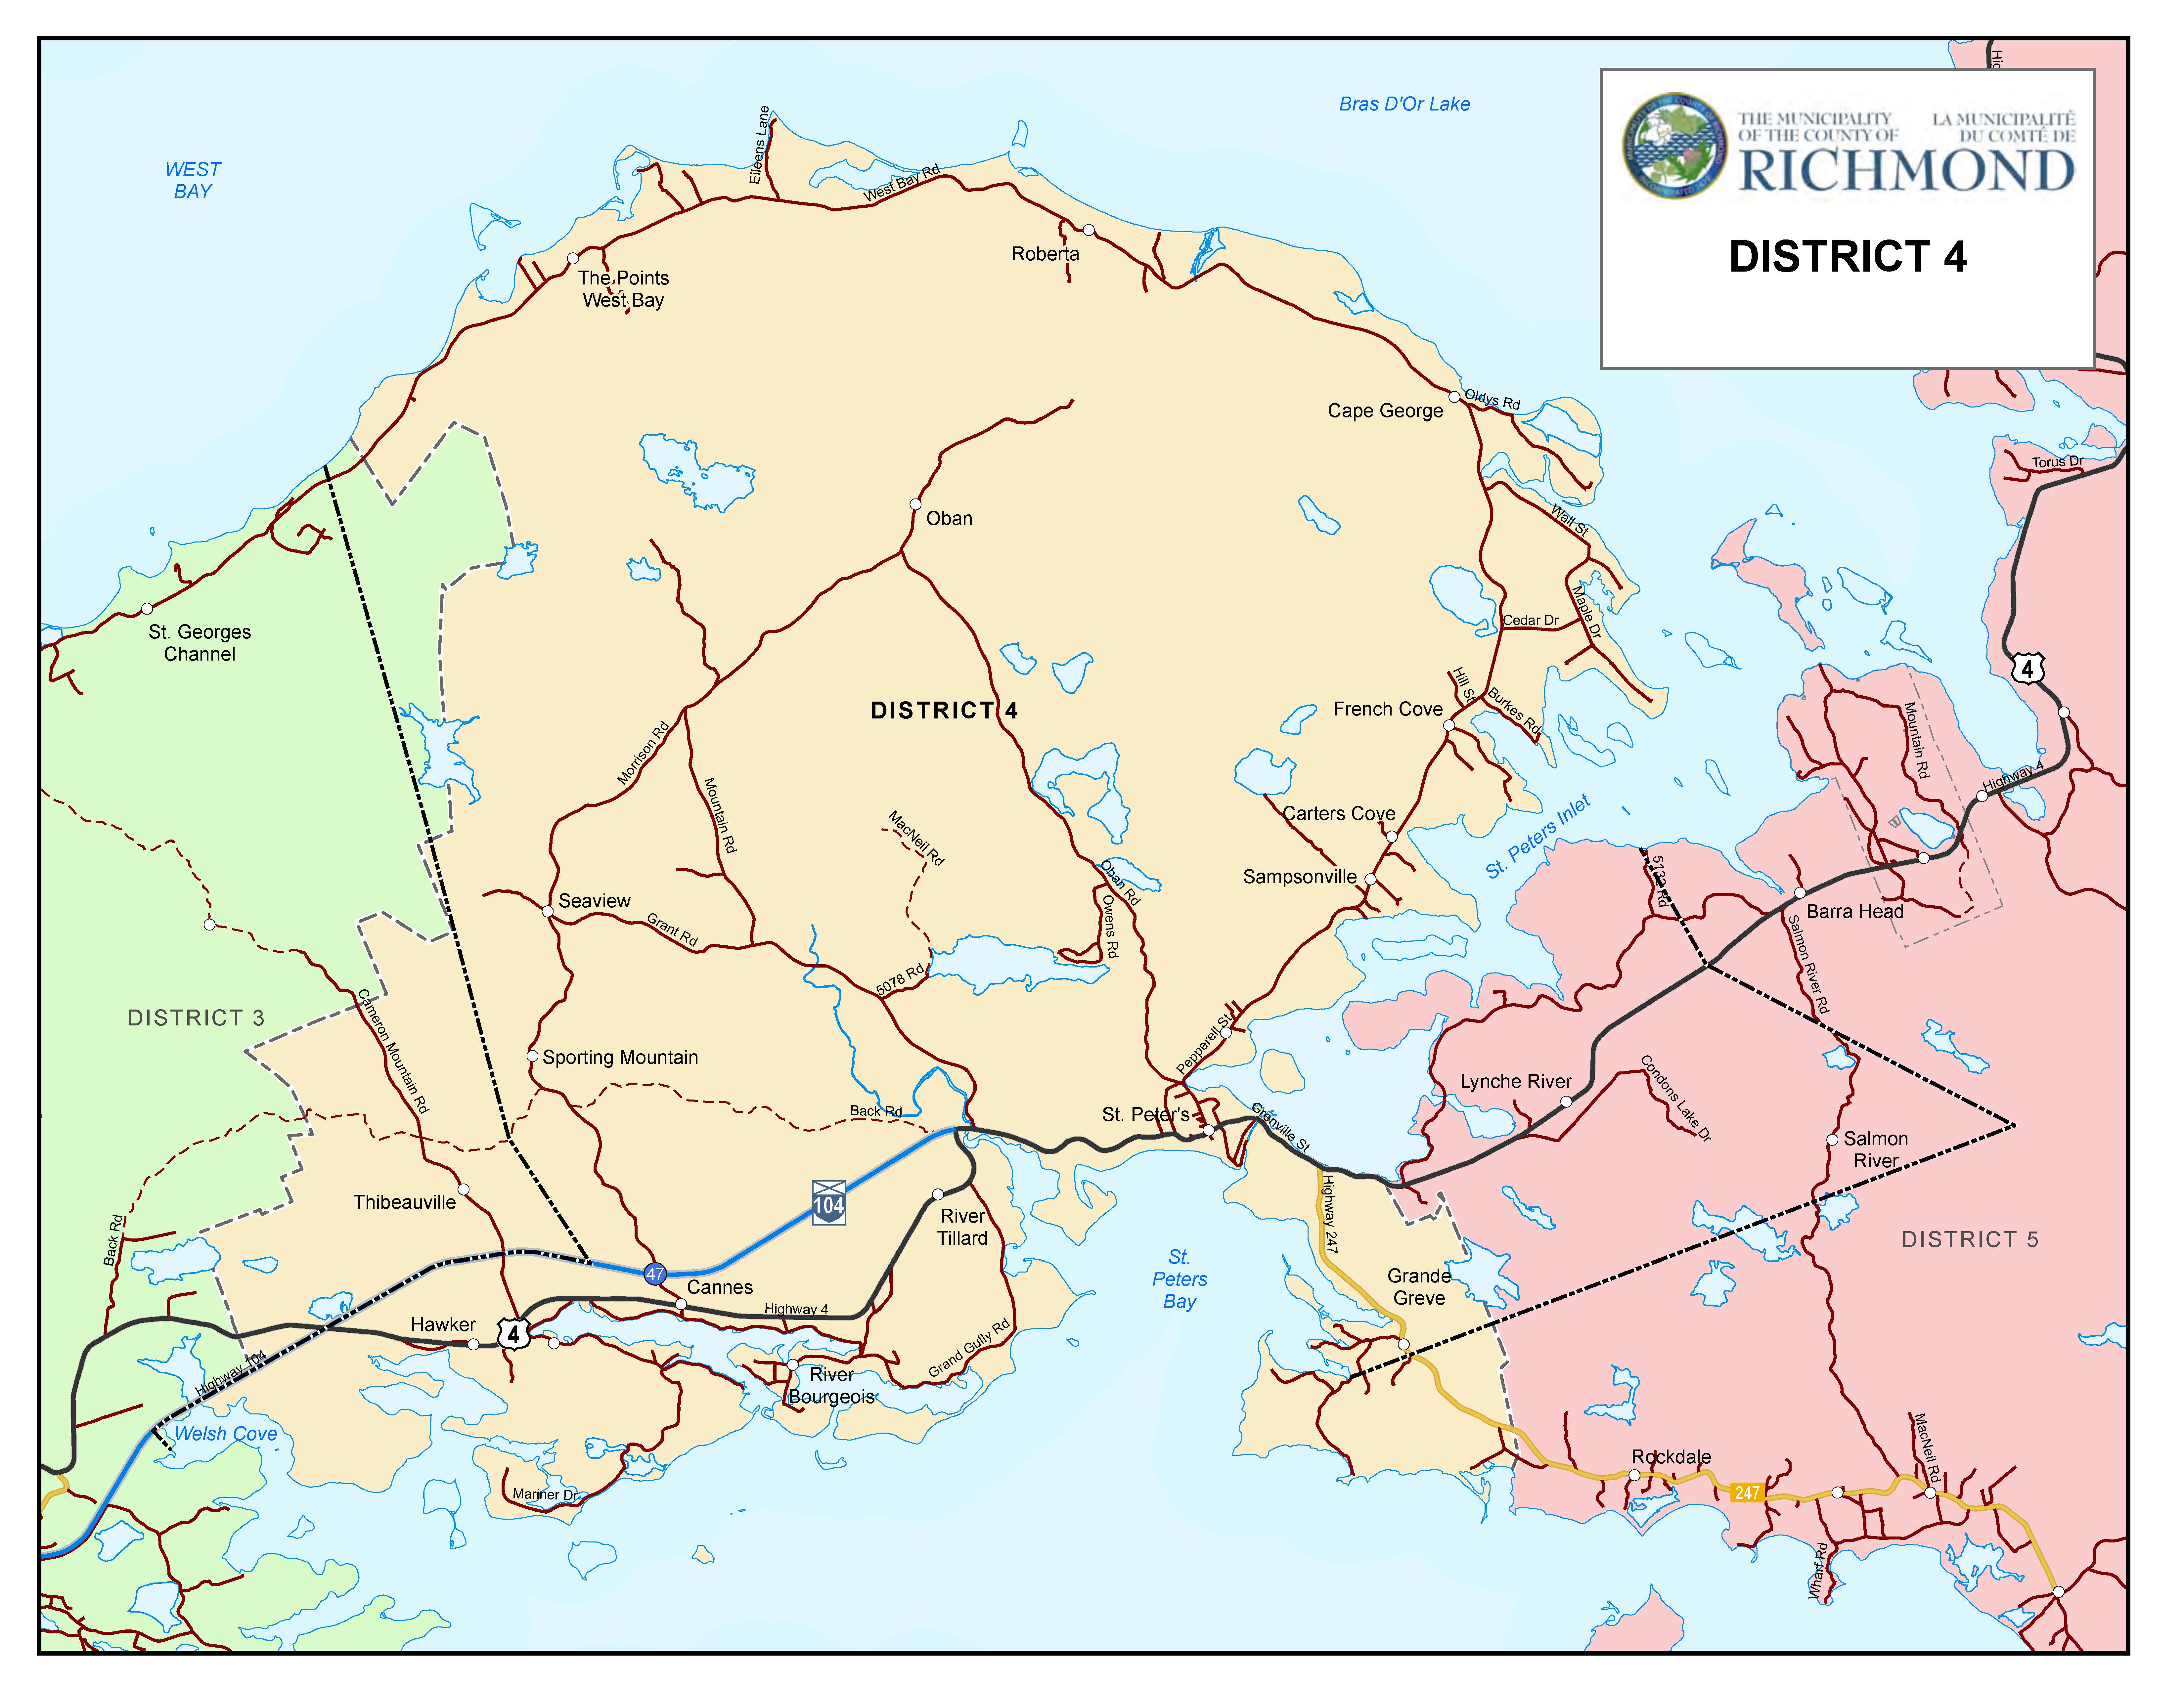 Graphic showing map of Electoral District 4 of the Municipality of Richmond County